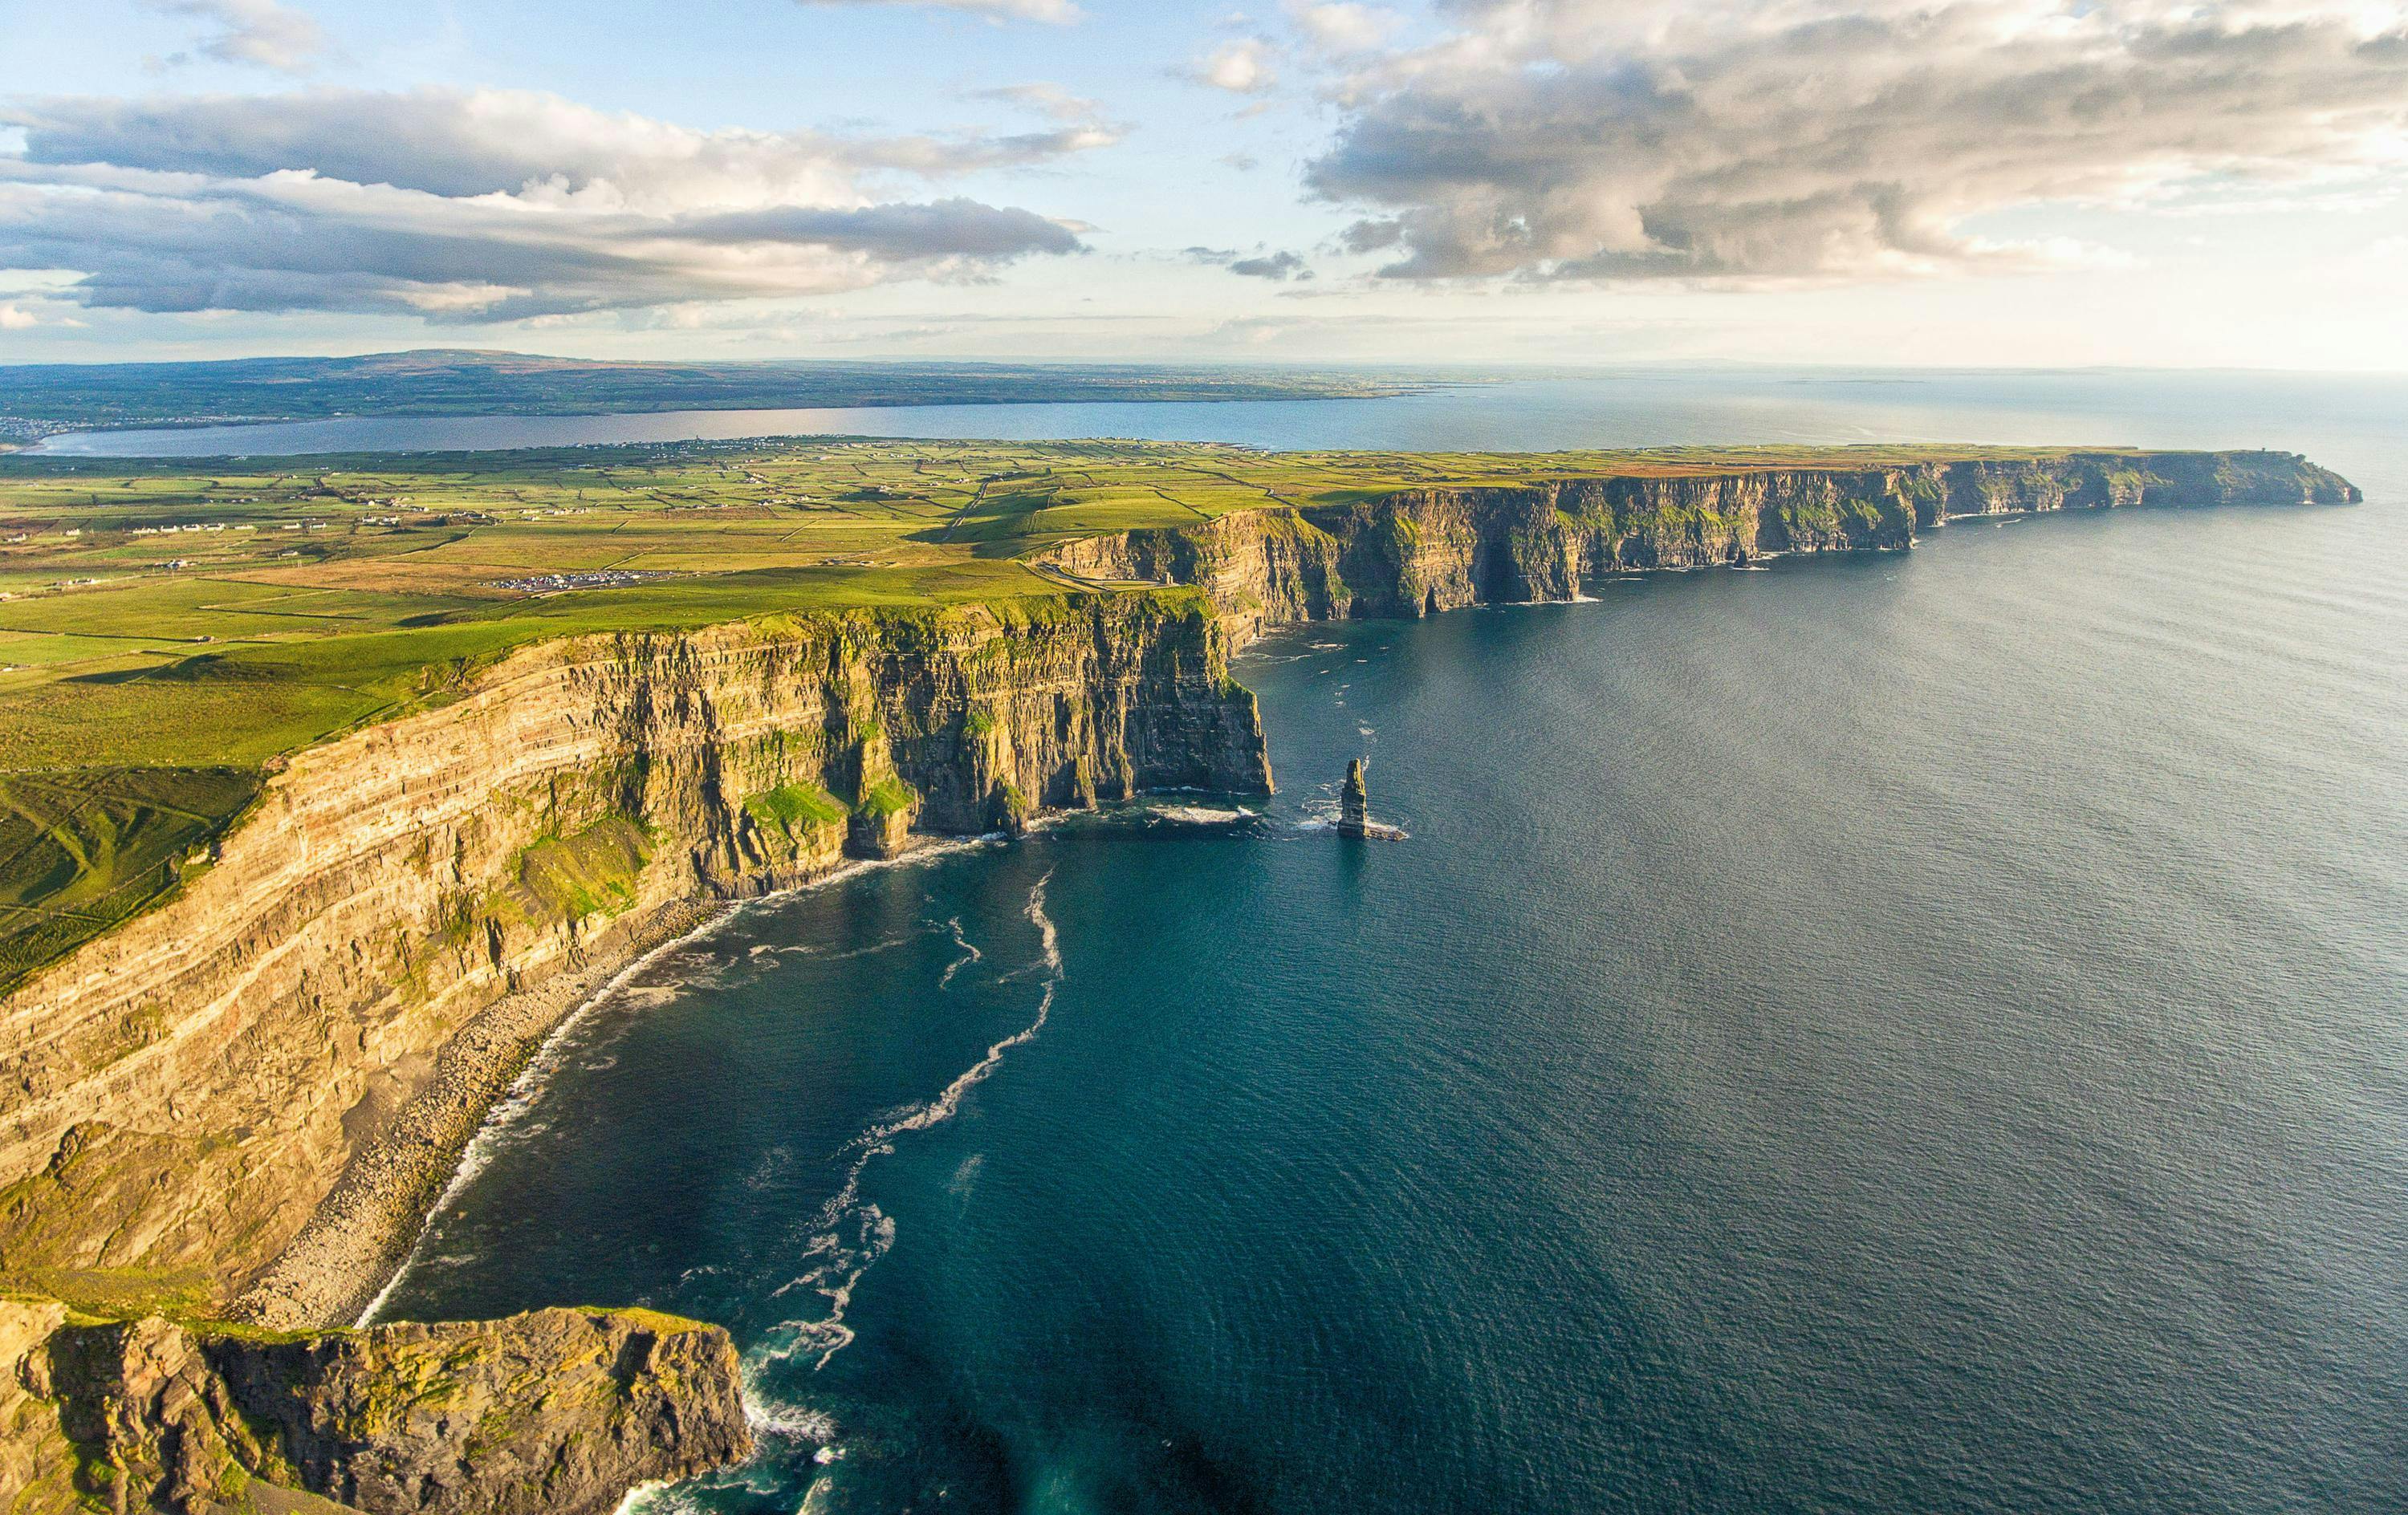 Aerial view of the world-famous Cliffs of Moher in county Clare, Ireland